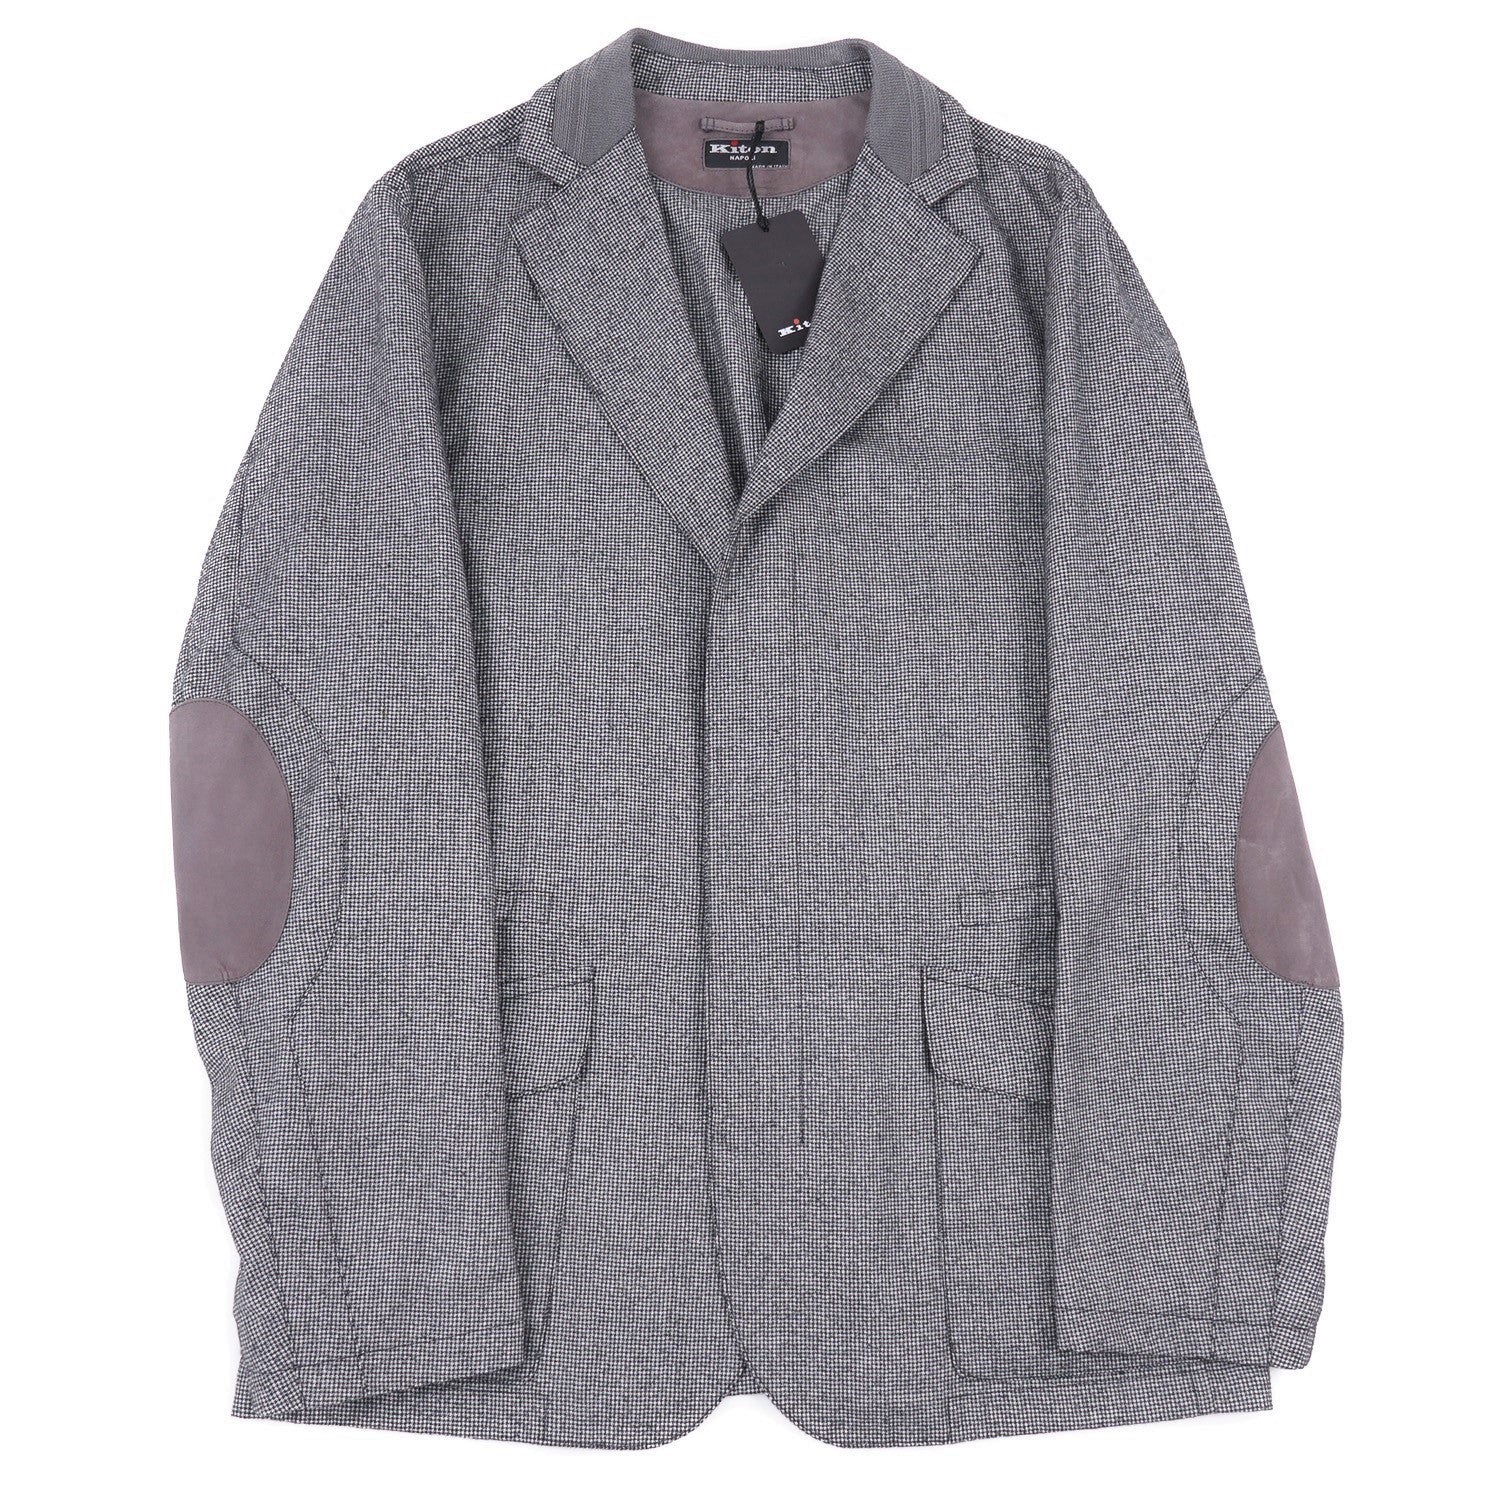 Kiton Cashmere Sport Coat with Suede Details - Top Shelf Apparel